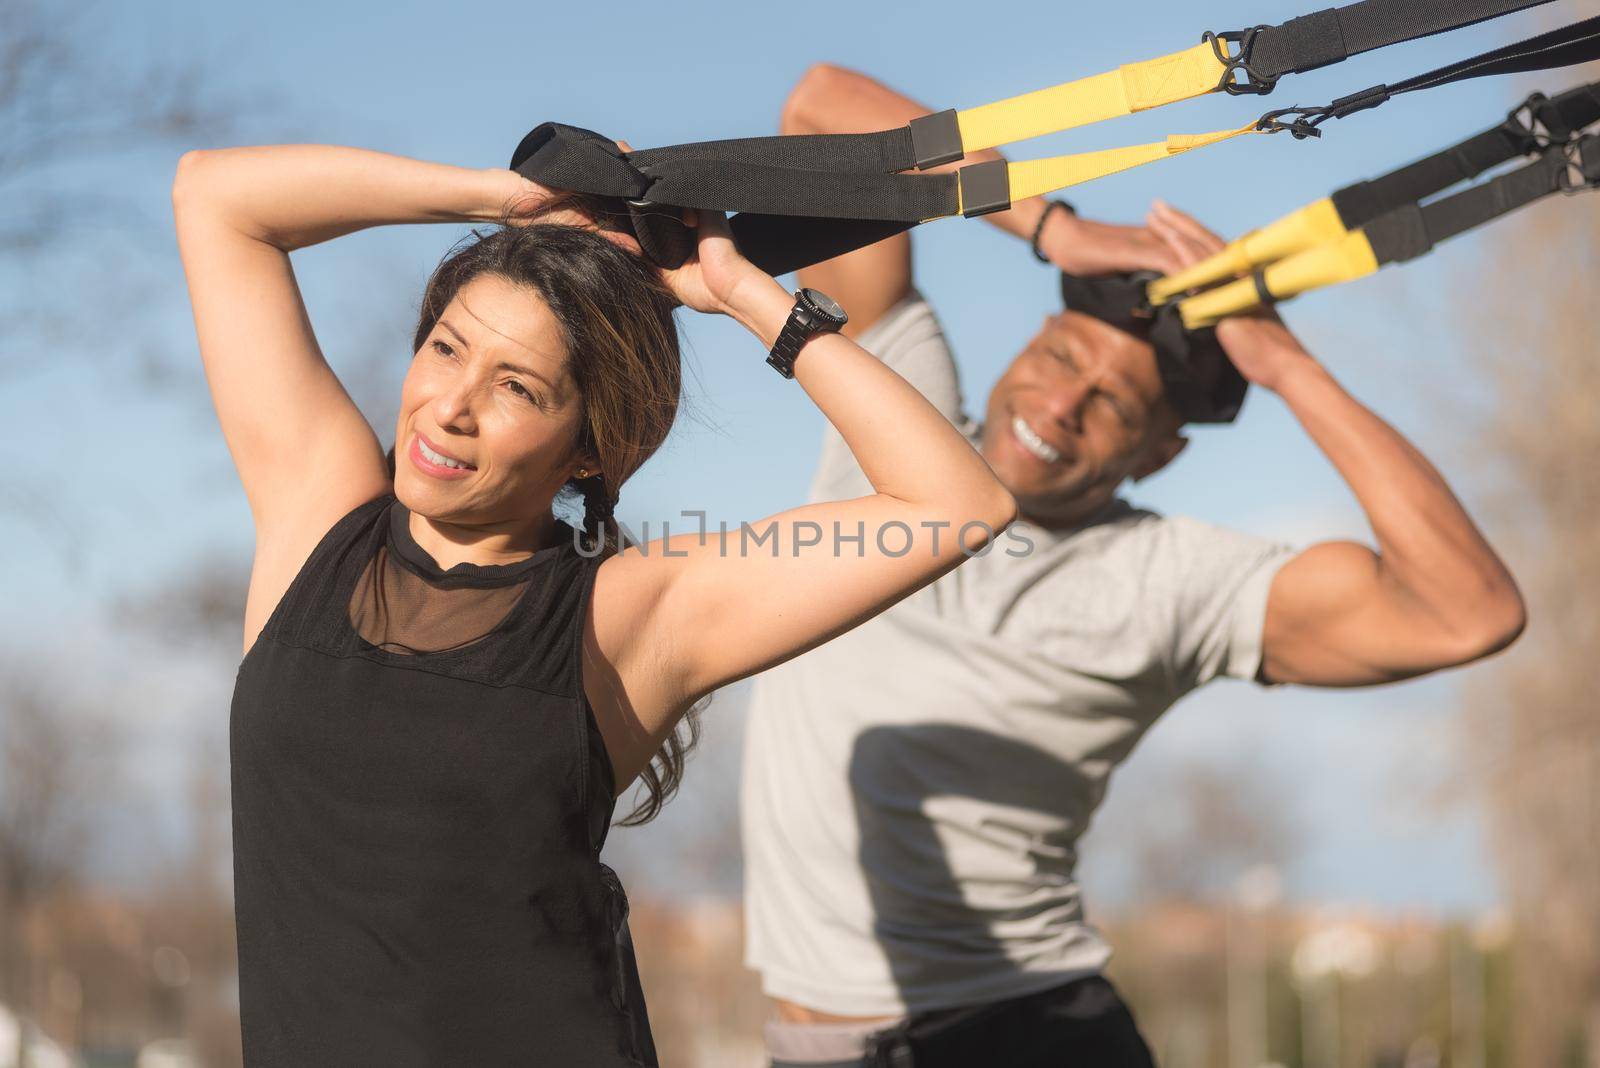 Athletic partners doing biceps and arms exercise with trx fitness straps in park. Multi-ethnic people exercising outdoors.